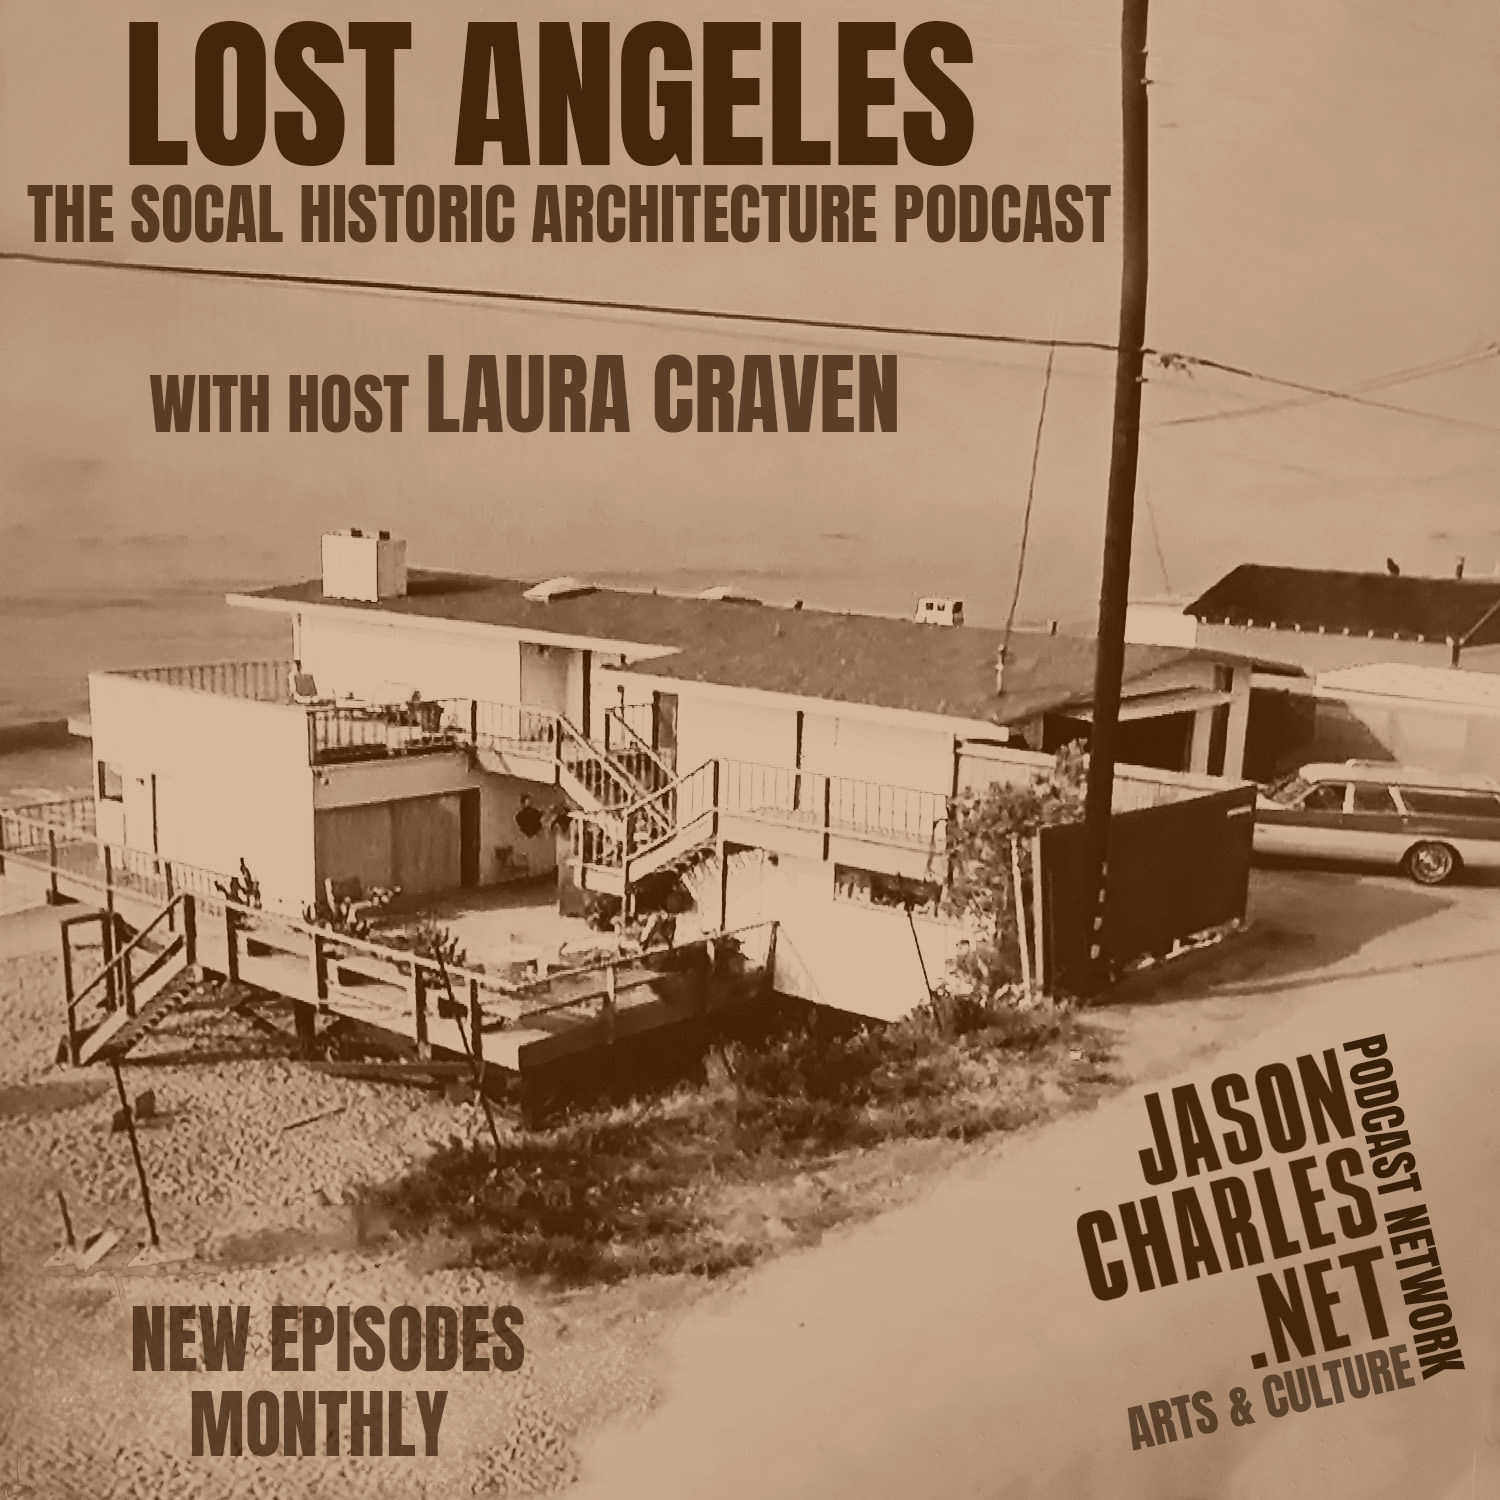 LOST ANGELES with Host Laura Craven